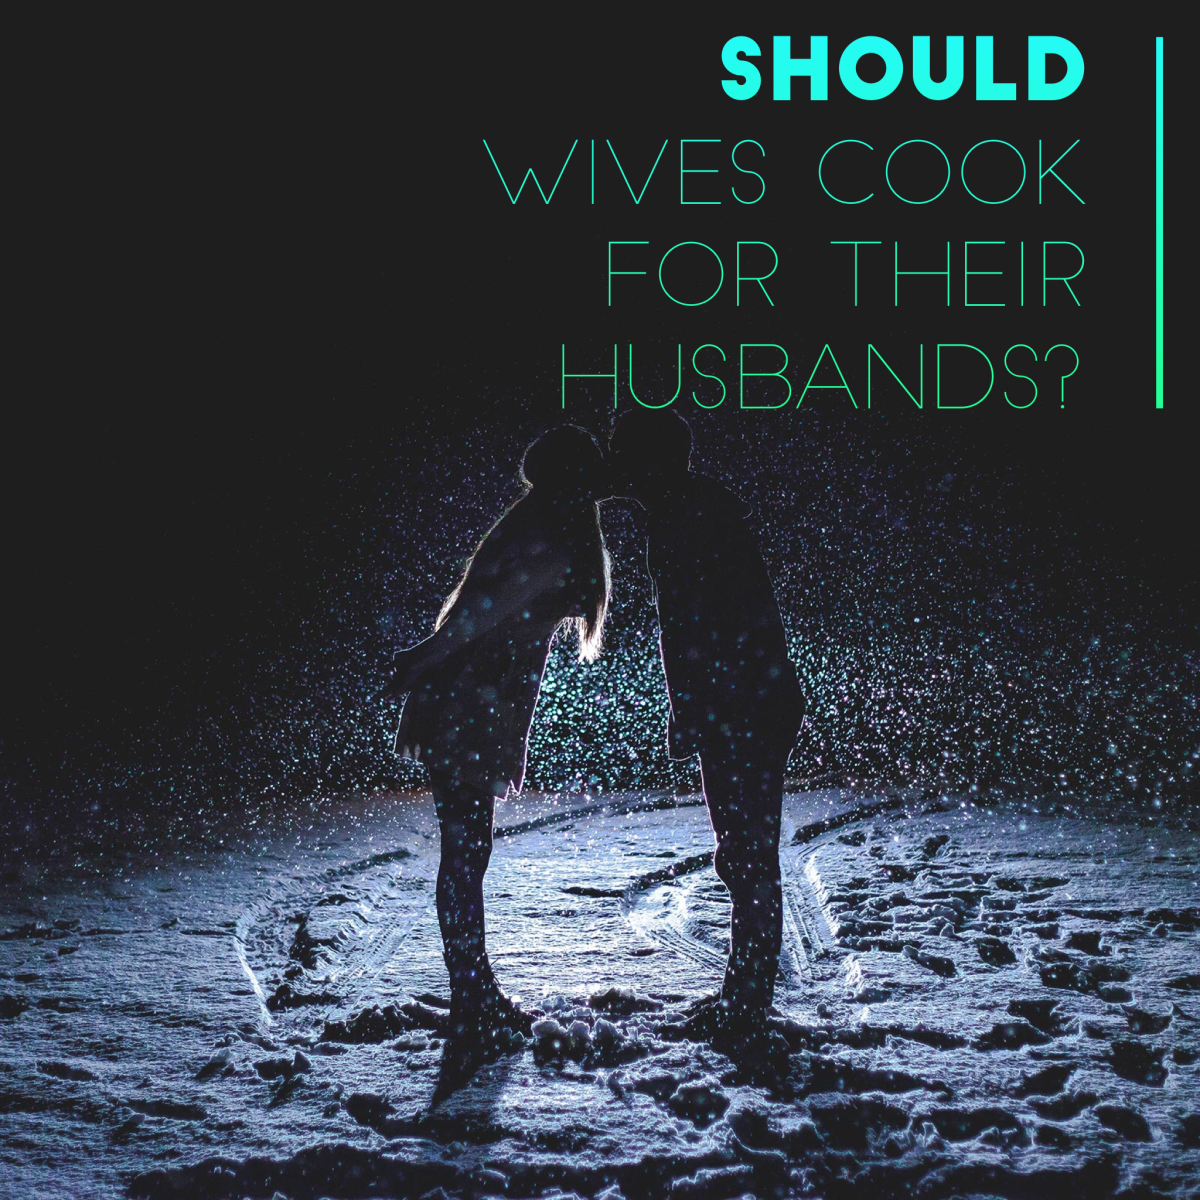 Should wives cook for their husbands?